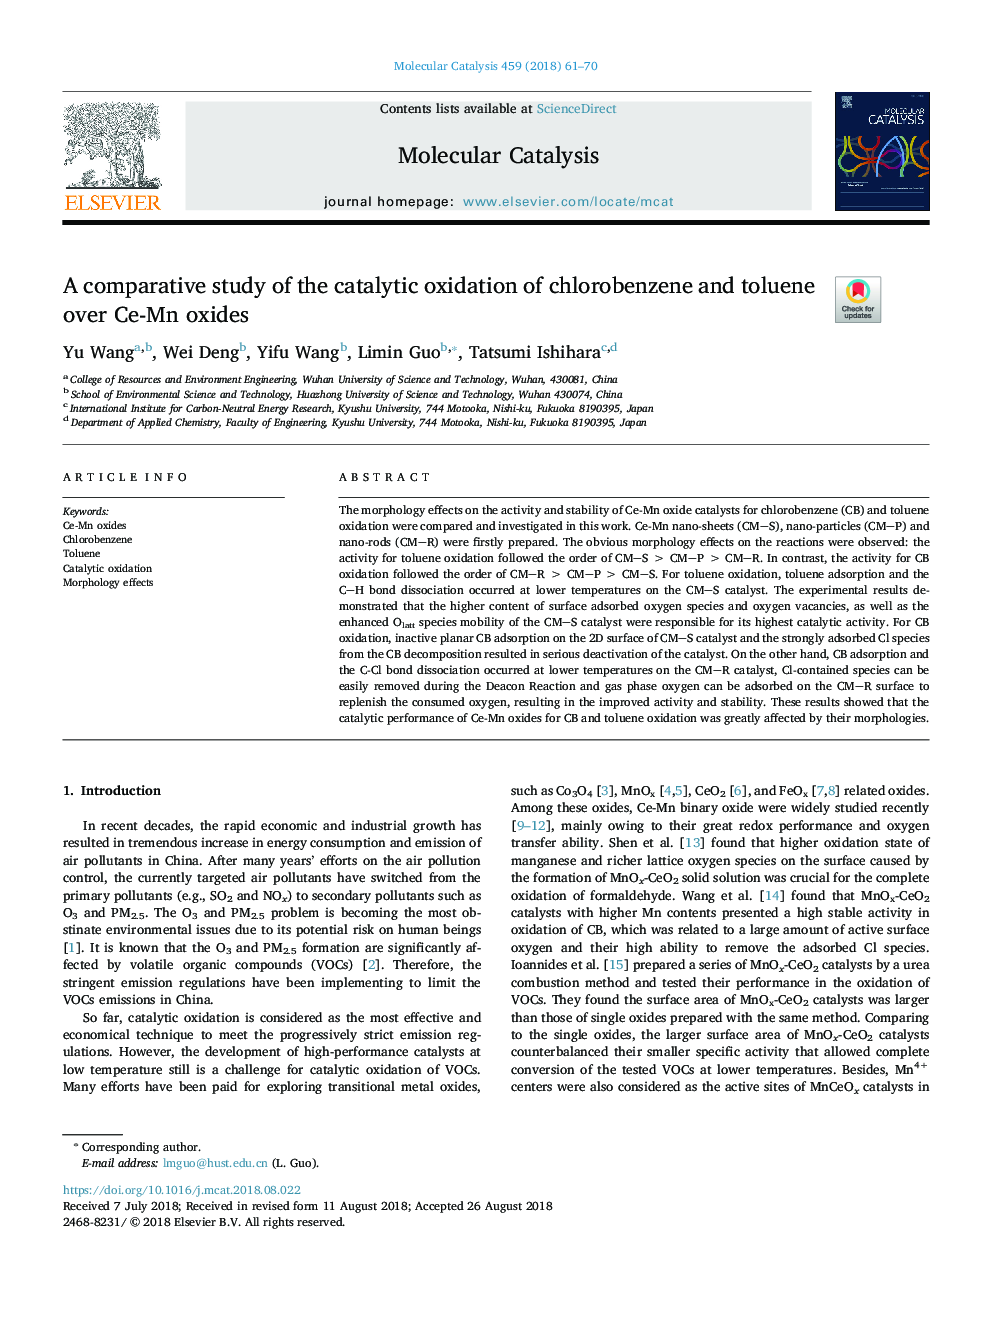 A comparative study of the catalytic oxidation of chlorobenzene and toluene over Ce-Mn oxides